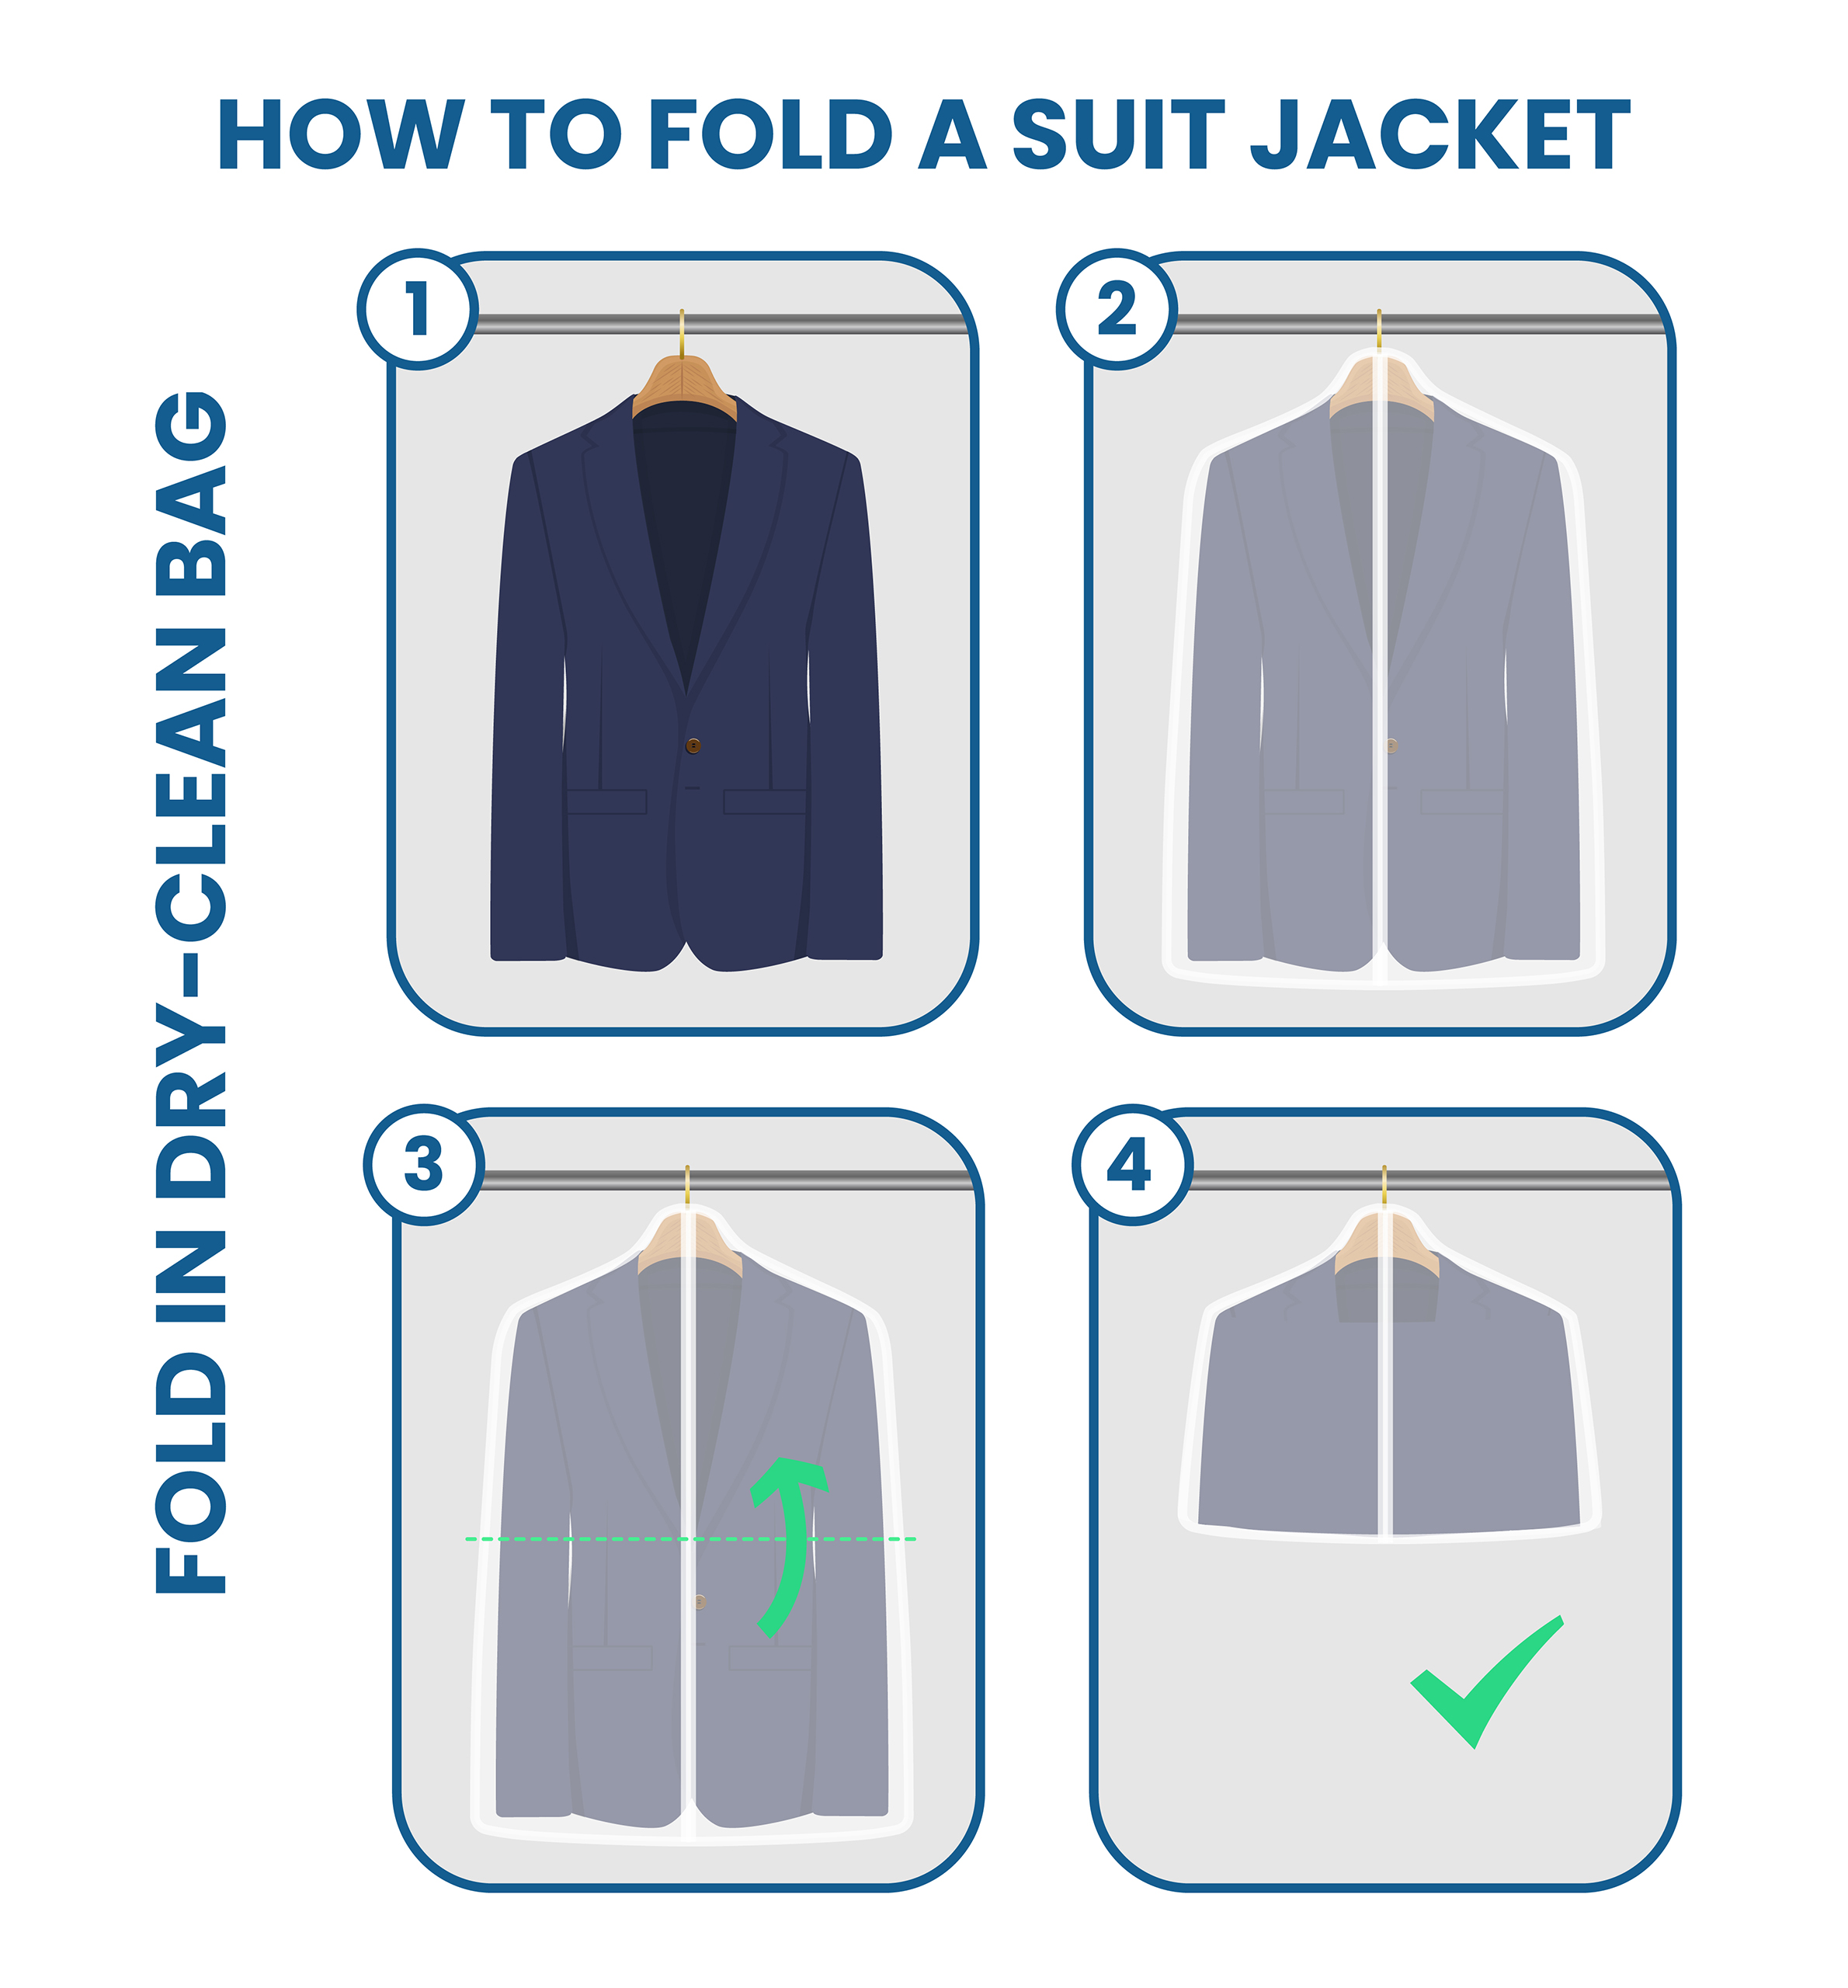 how to fold the suit jacket in a dry-cleaning bag